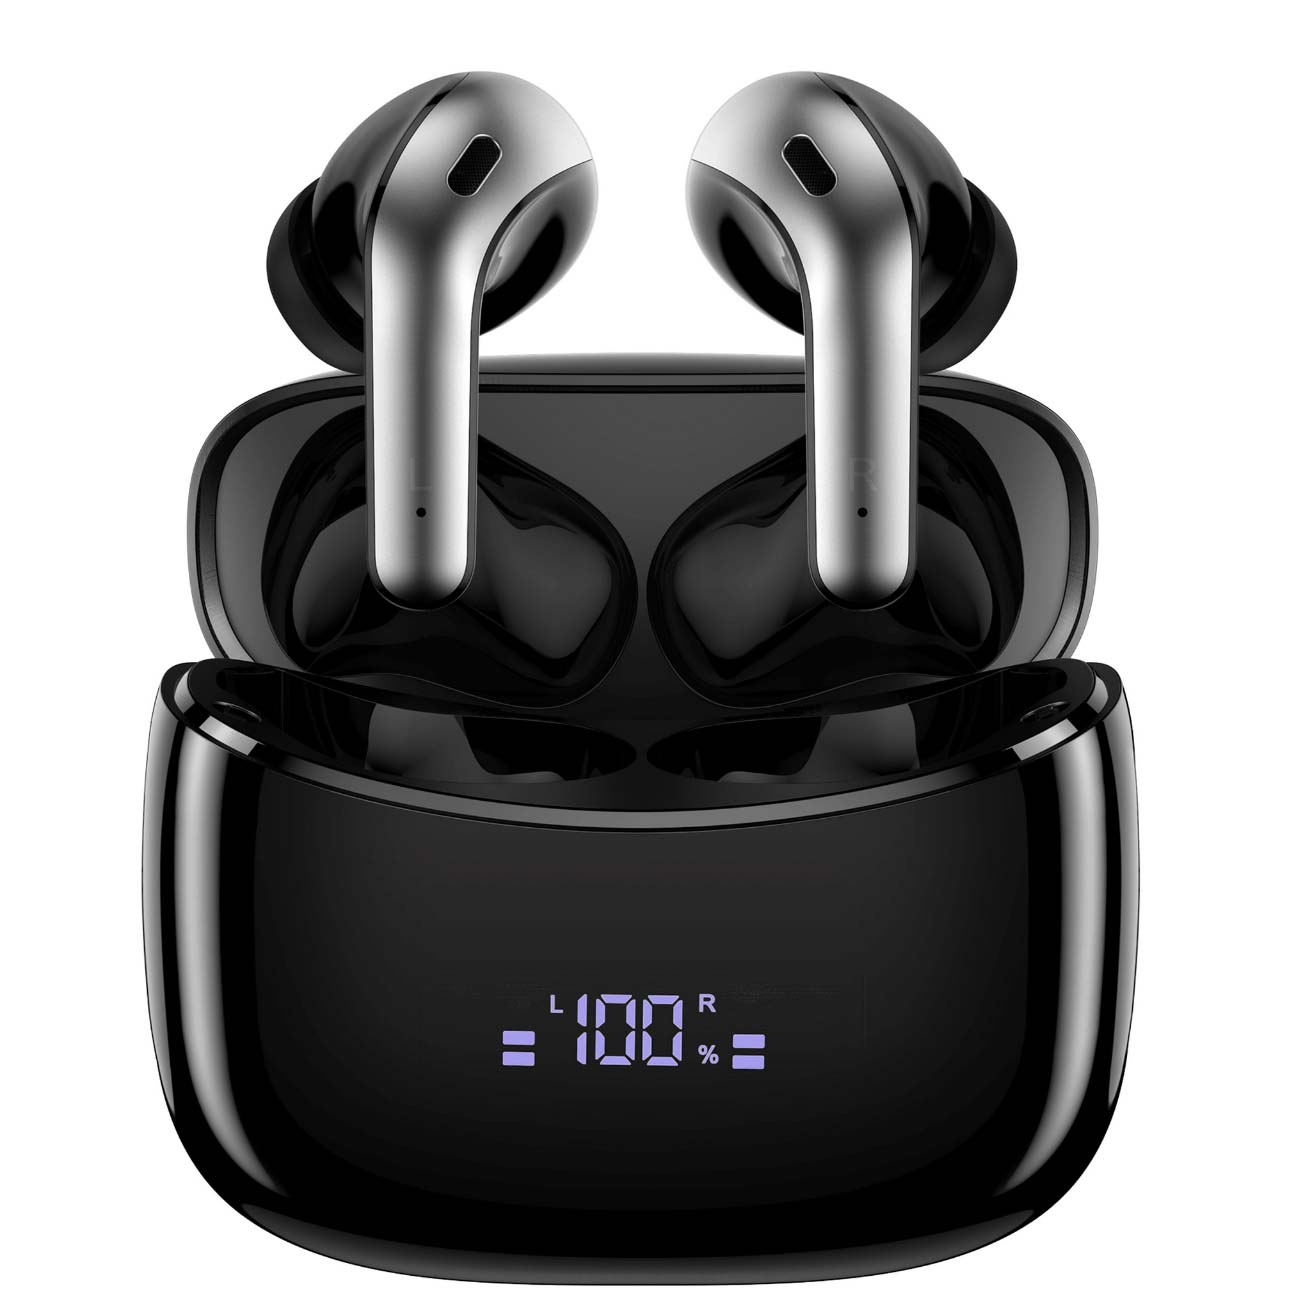 Black earbuds with battery indication